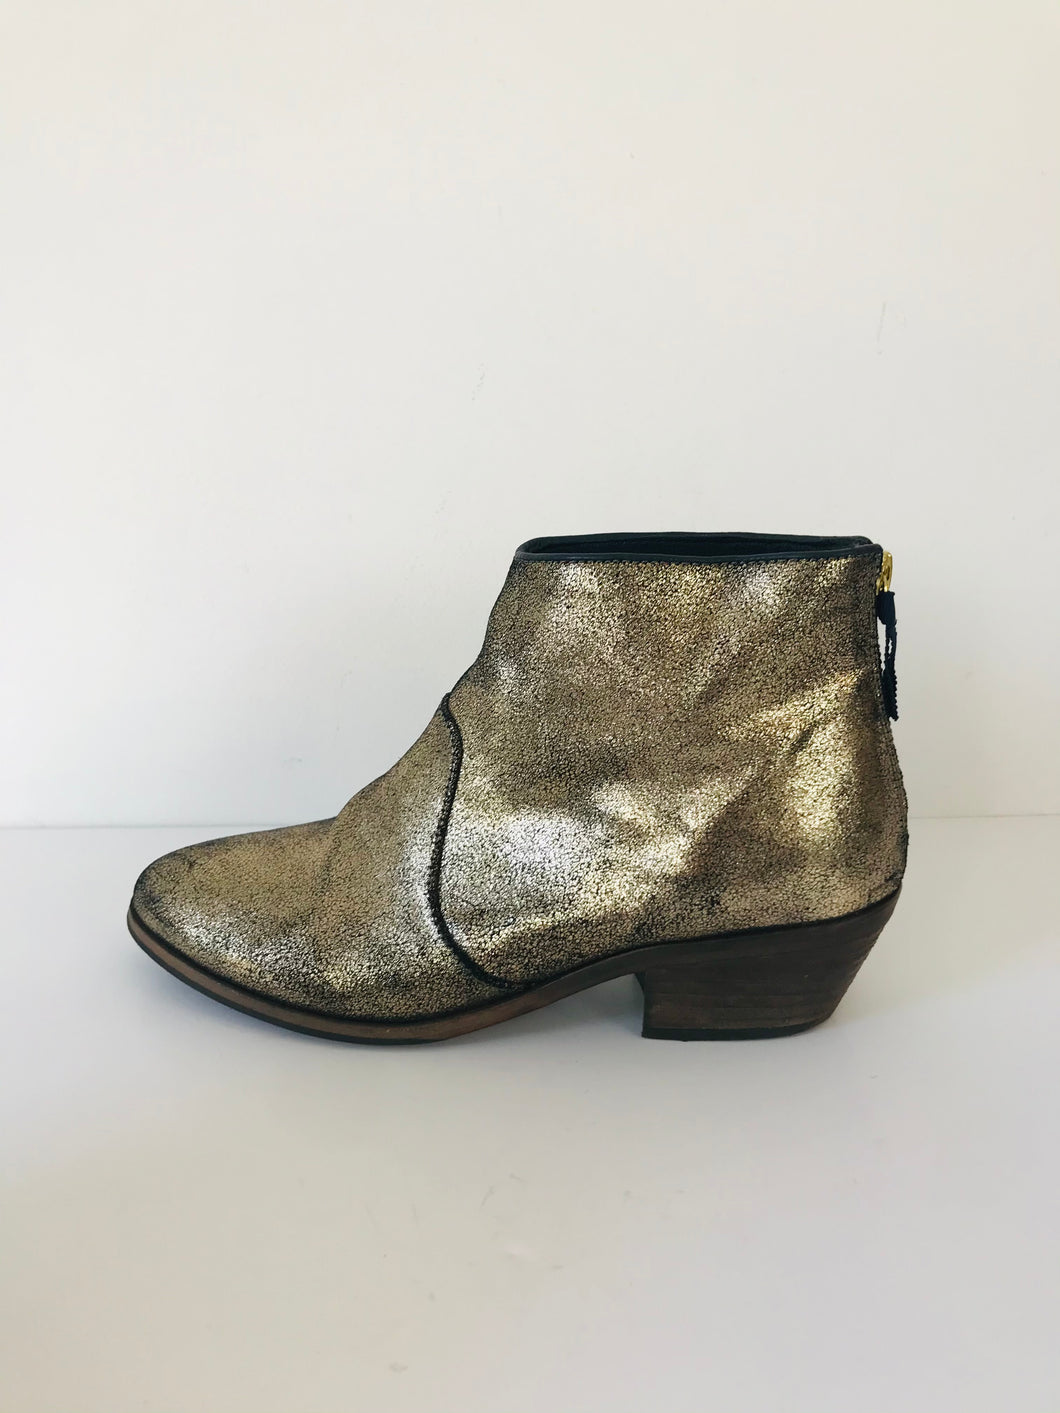 Boden Women’s Metallic Ankle Boots | 39 UK6 | Gold